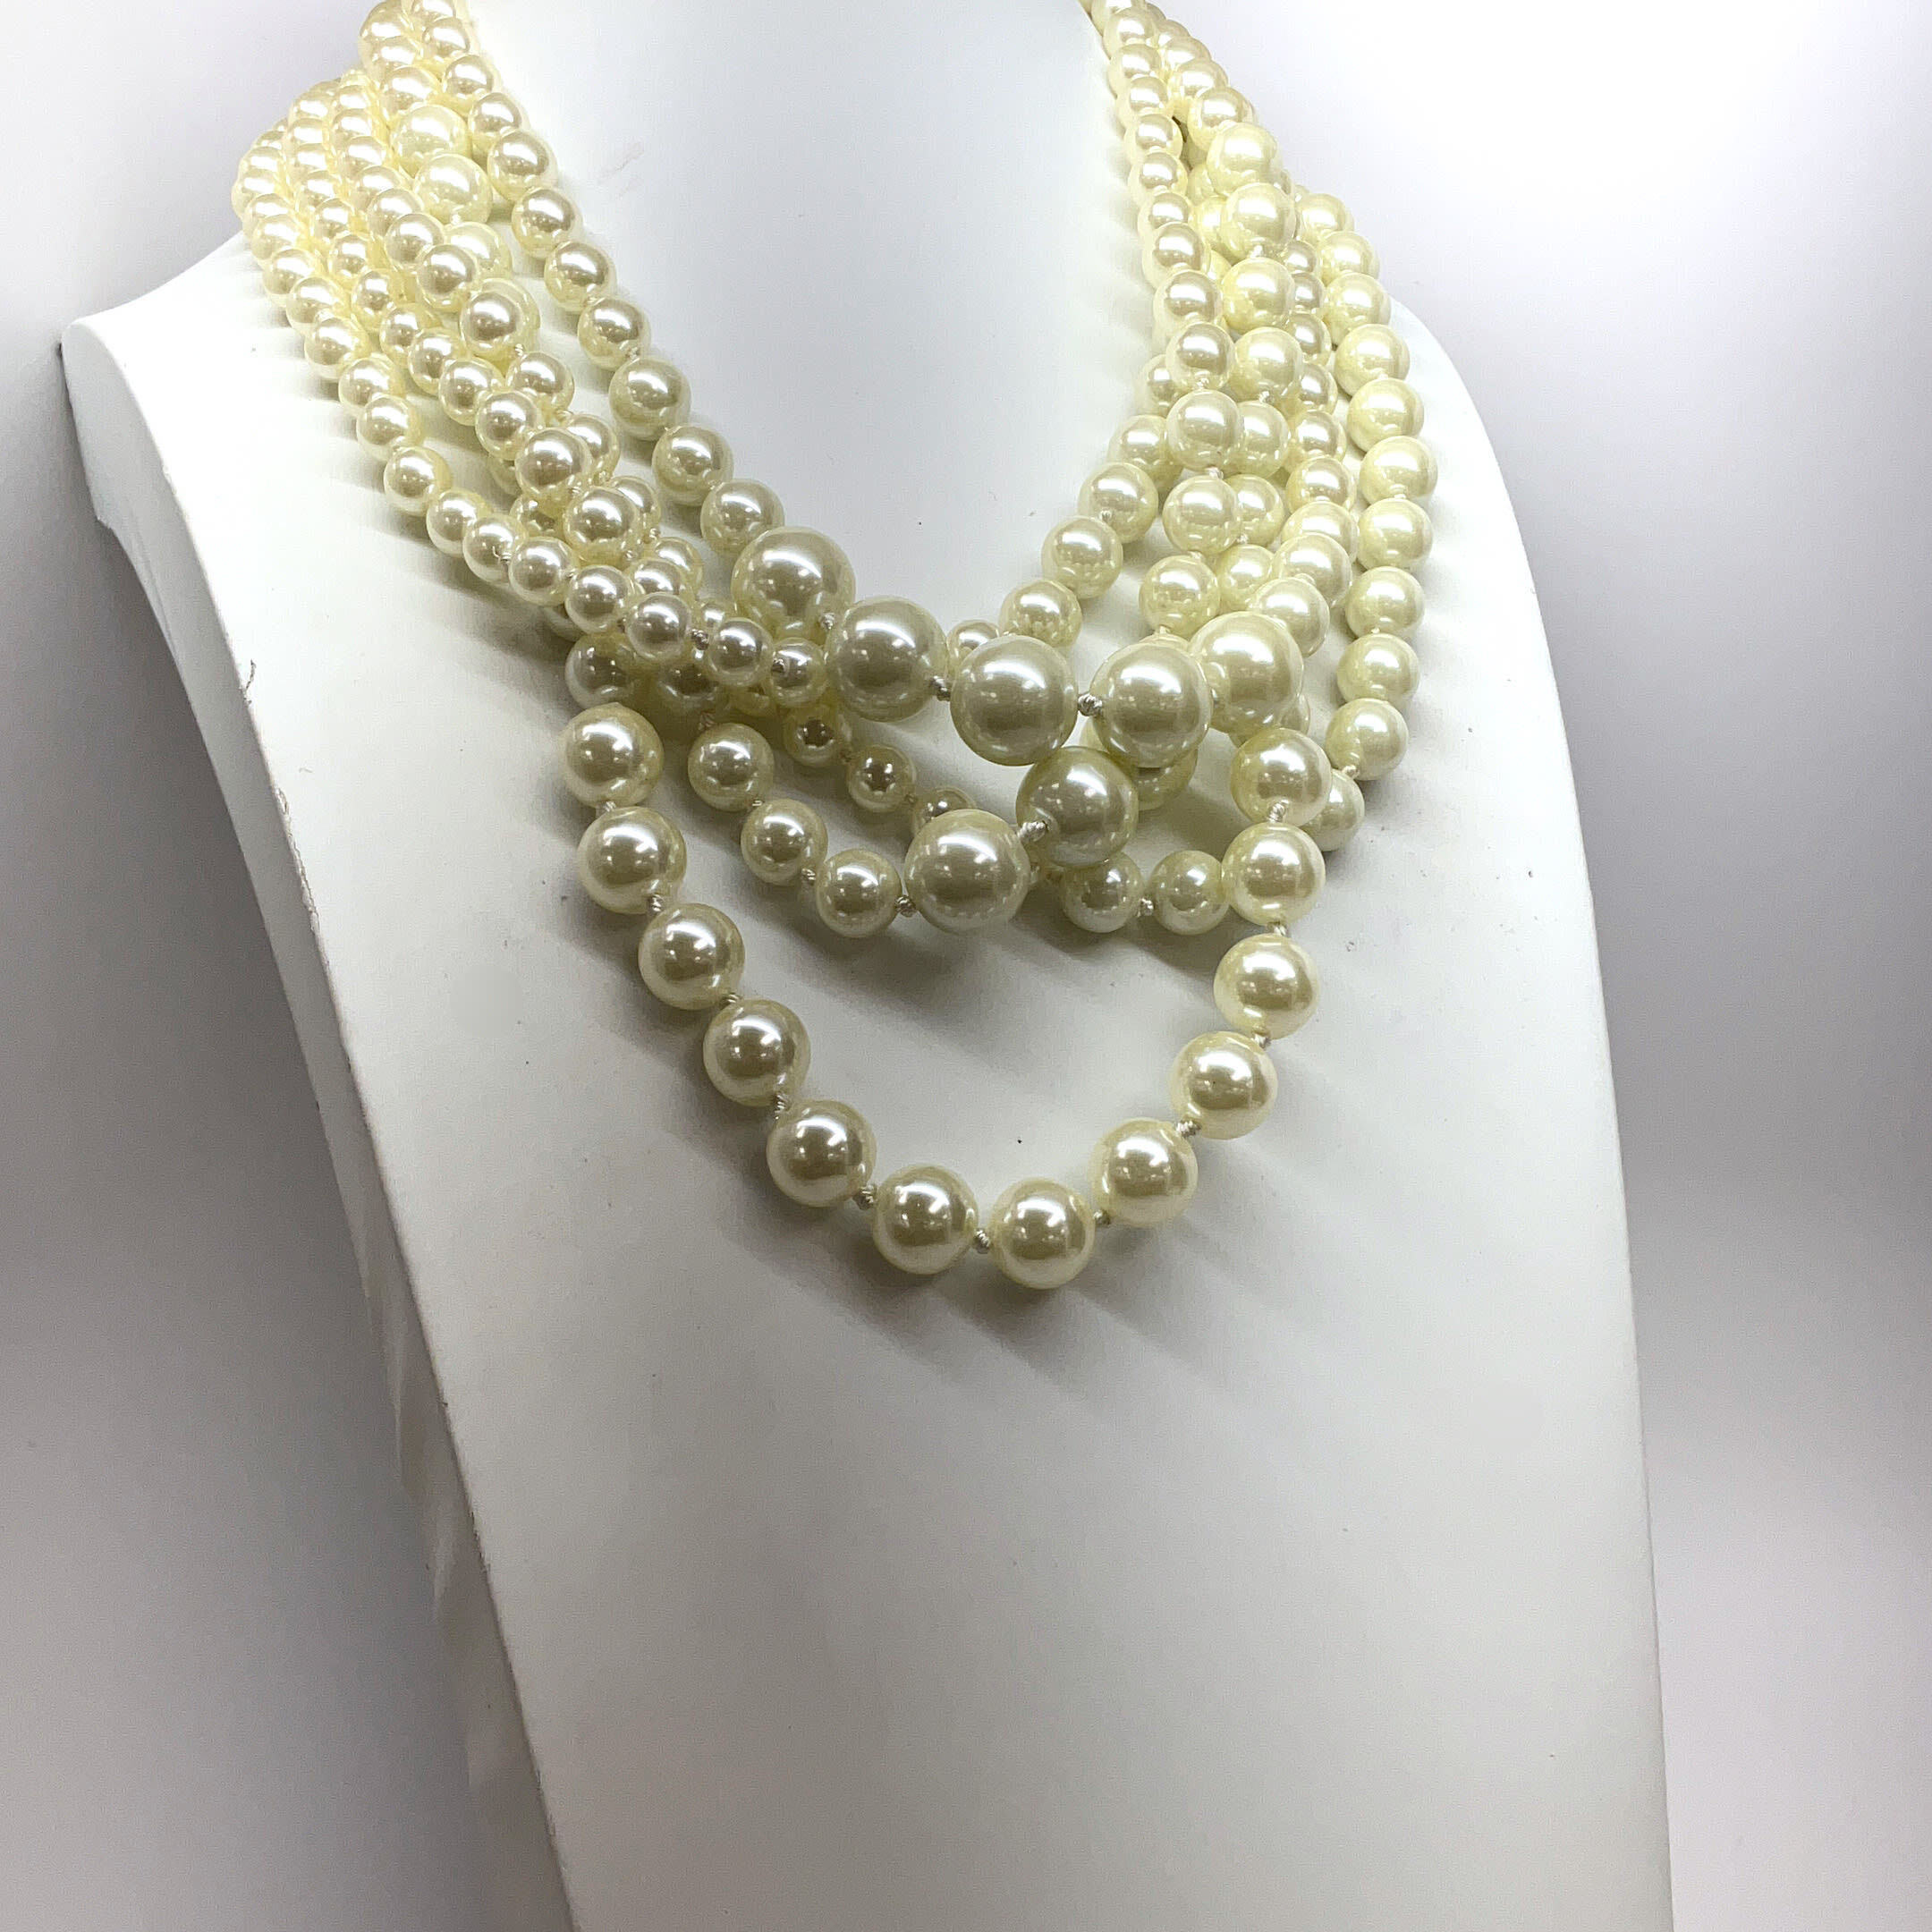 Vintage Multi Strand Pearl Necklace White Faux Pearl Choker 1960s 2-strand  Graduating Pearl Collectible Jewelry Gift - Etsy